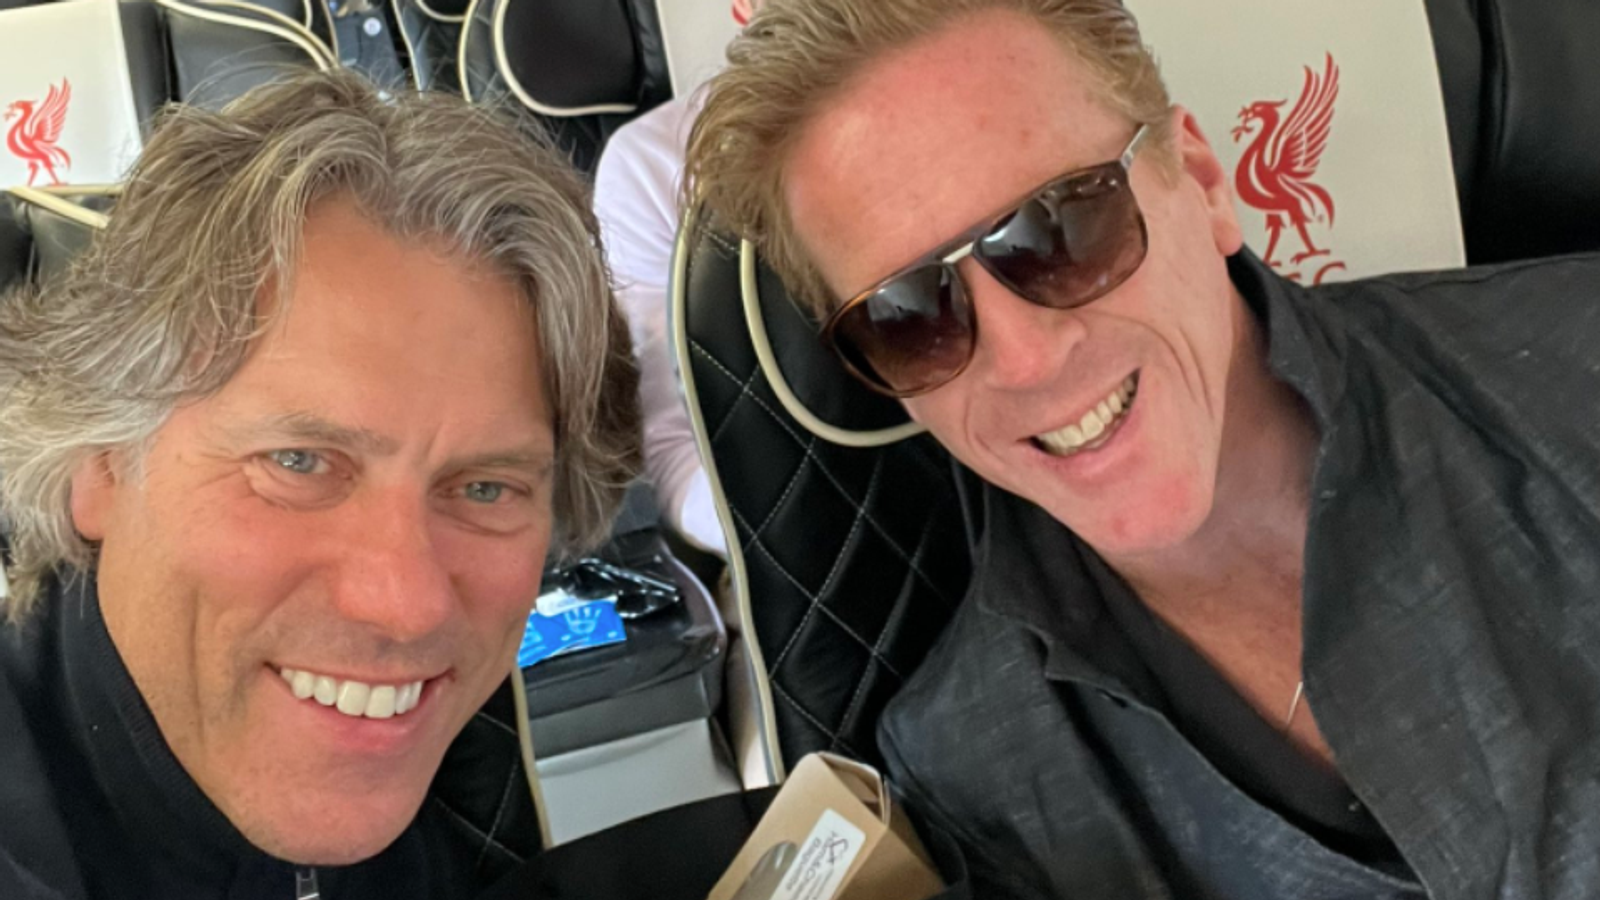 Champions League final chaos: John Bishop and Damien Lewis left stranded in Paris after flight is delayed for six hours | World News